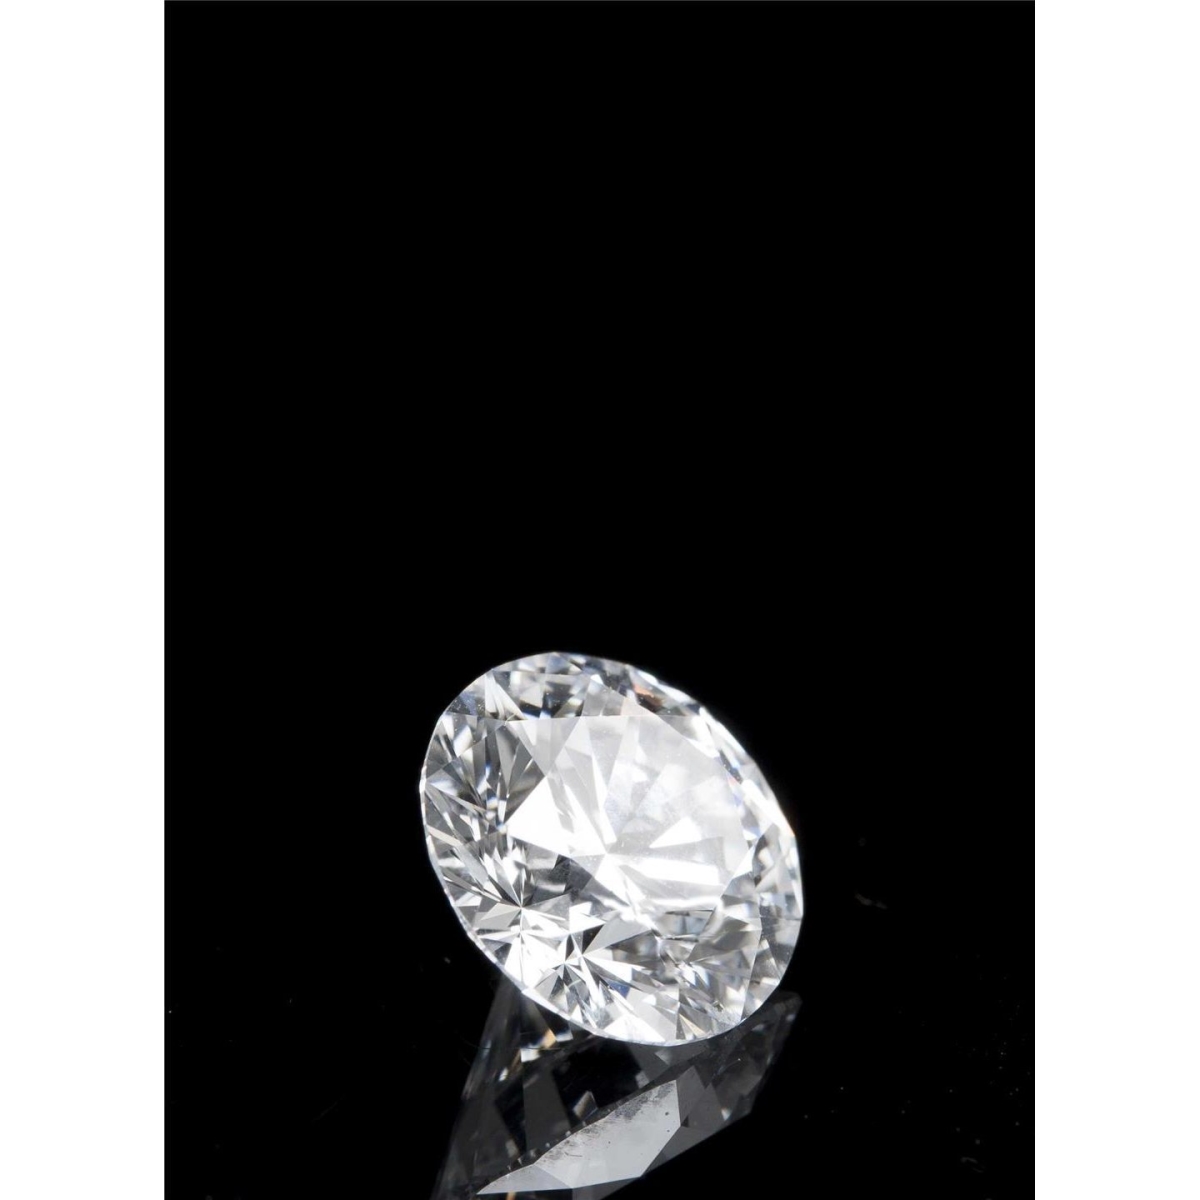 Picture of Harry Chad Enterprises 64172 Round Cut G SI1 2 CT Sparkling Loose Diamond